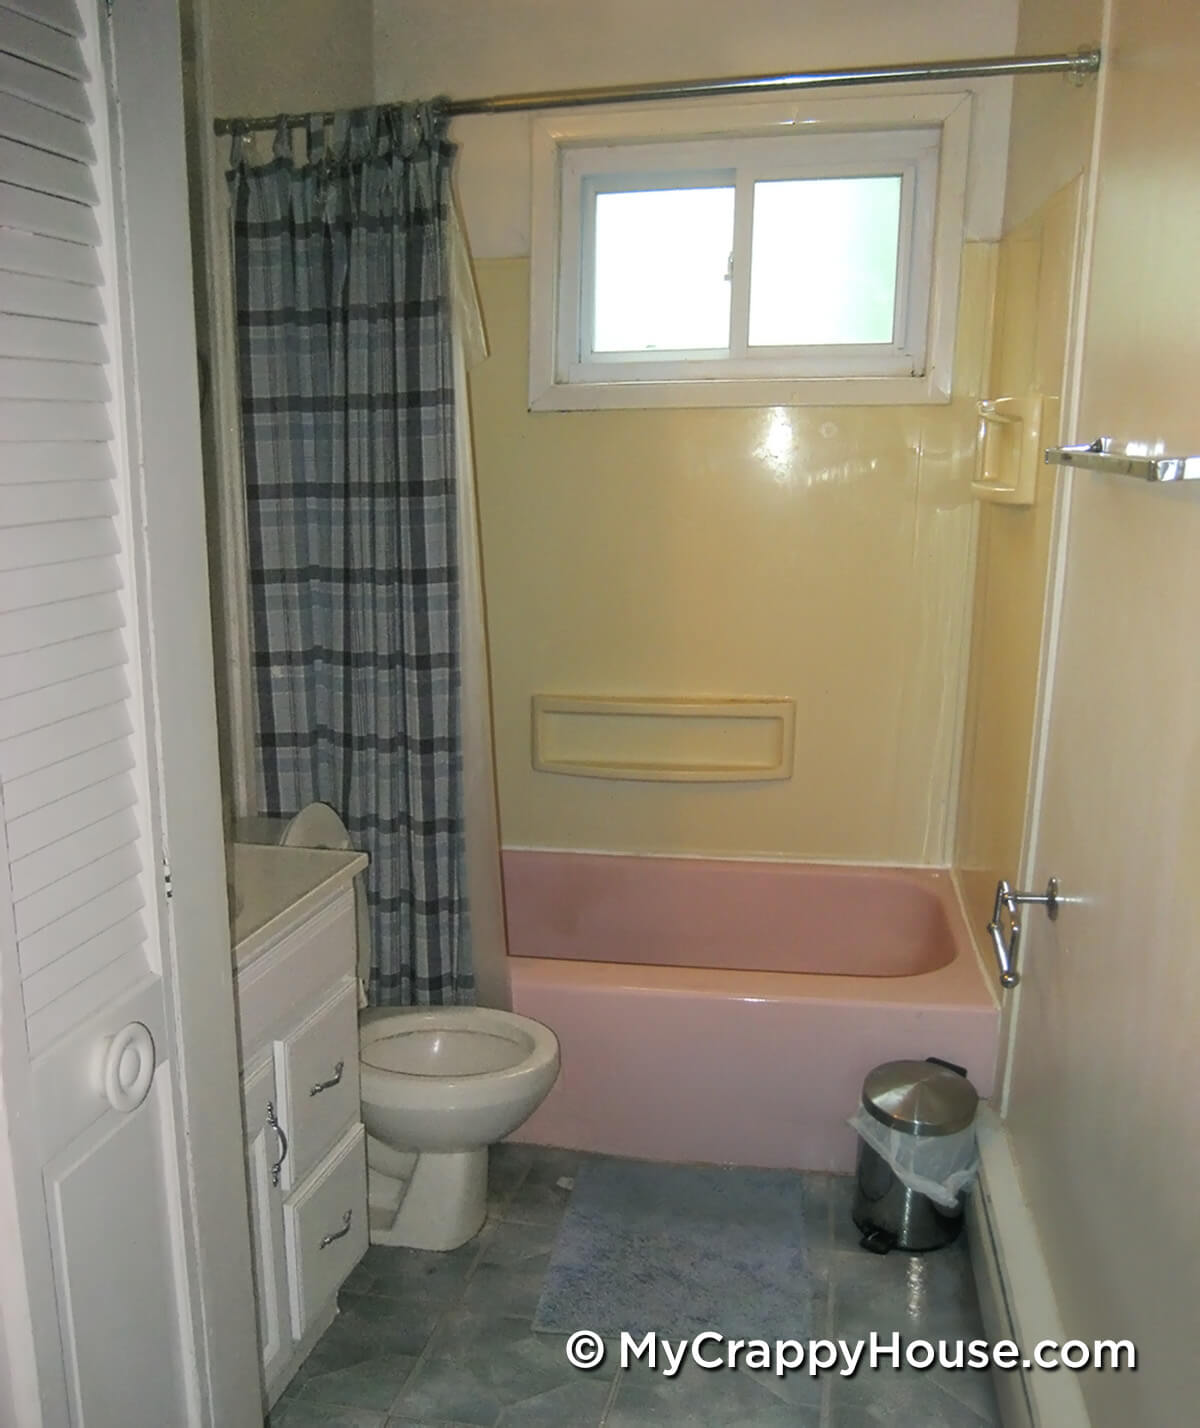 Bathroom with pink tub, yellow walls, blue floor and shower curtain. Super ugly.